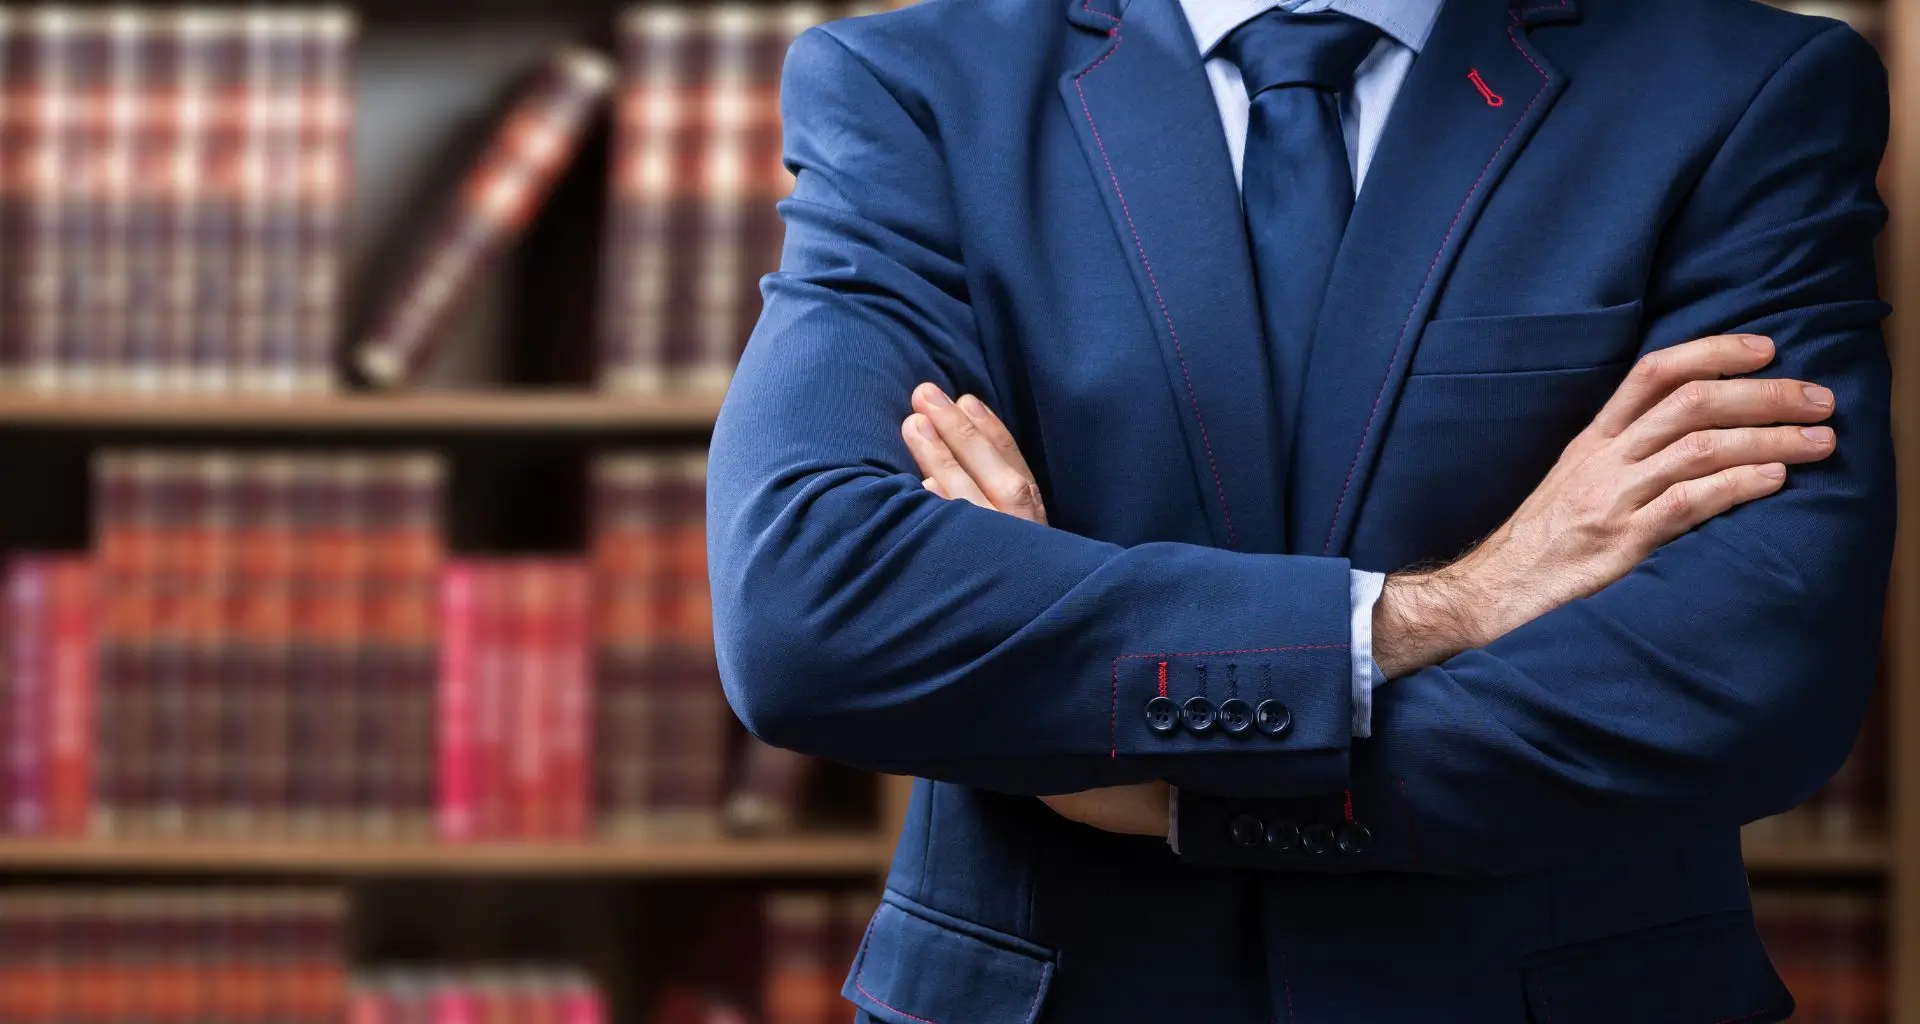 Confident legal expert in a blue suit standing with crossed arms in a library full of law books, representing professionalism in medico-legal consulting related to drug reports